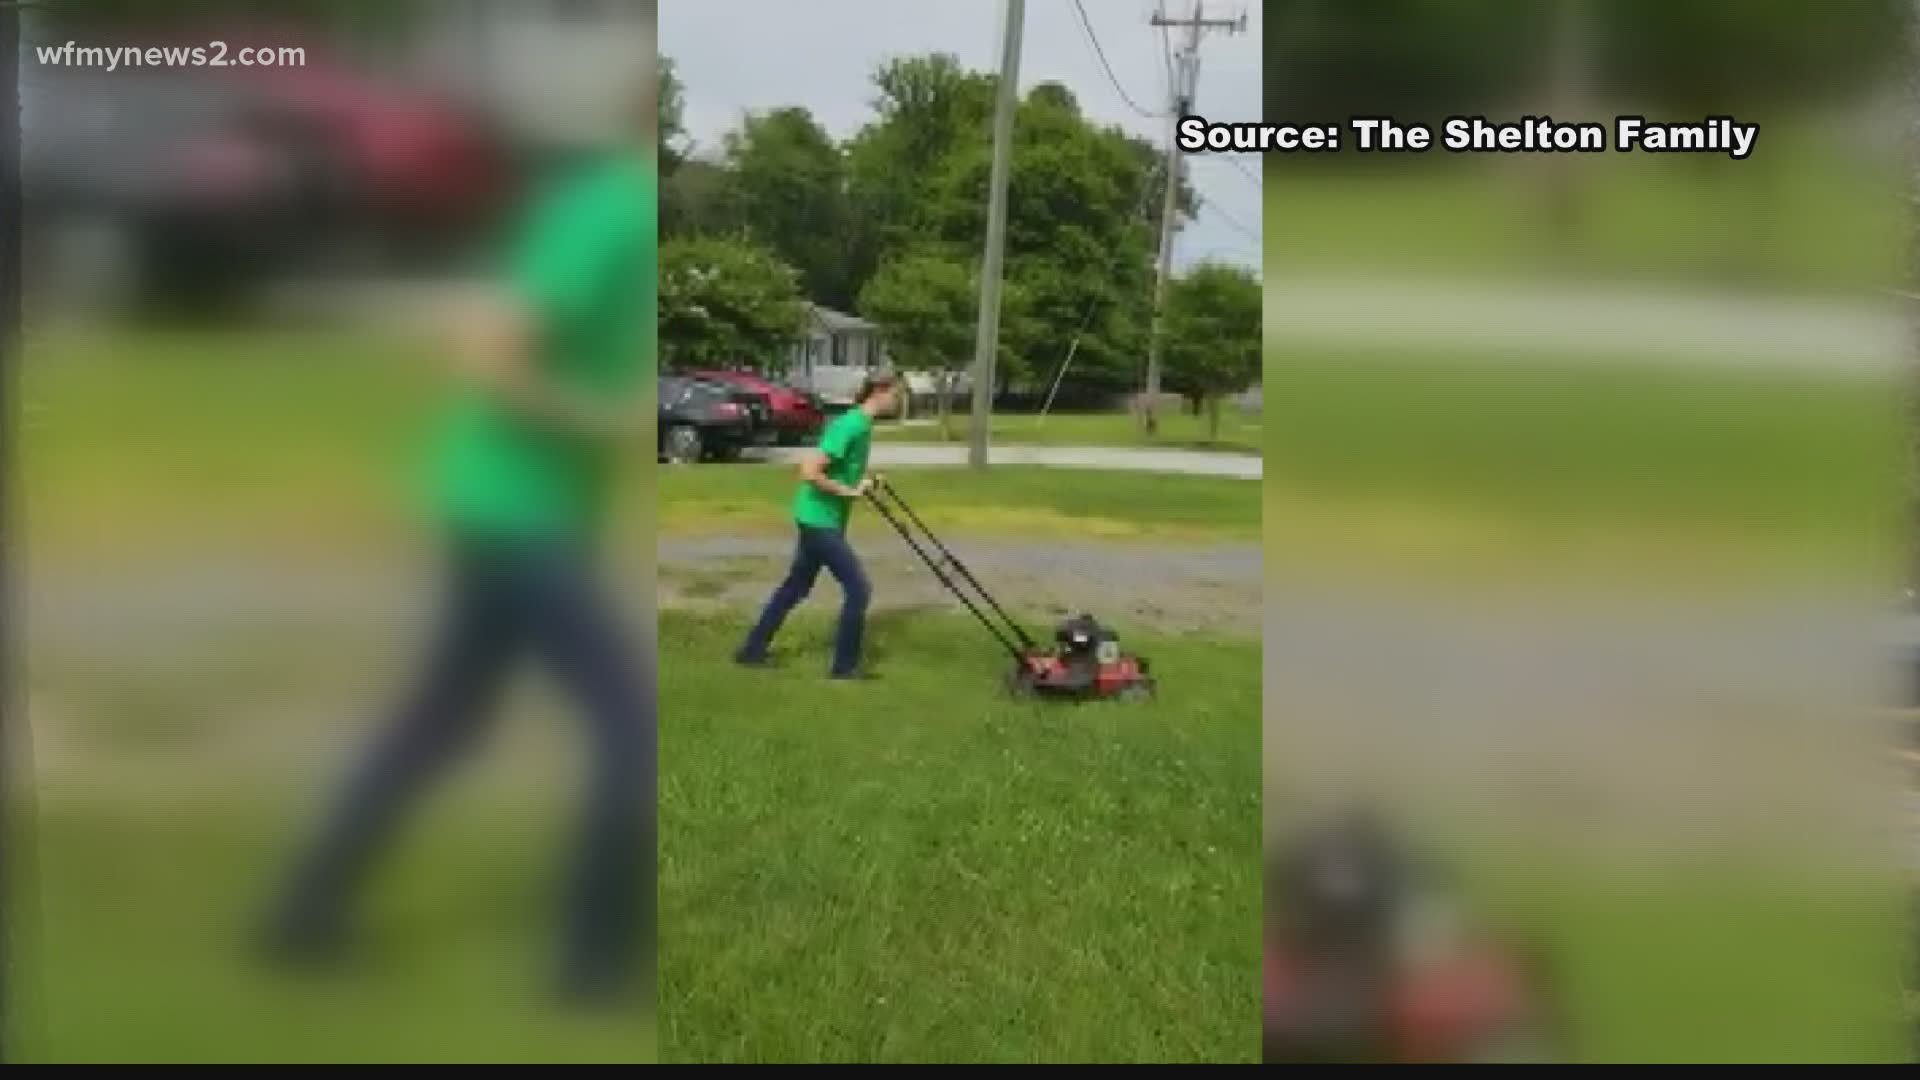 The challenge calls for kids to cut grass for 50 people who could use the help the most during the coronavirus pandemic.